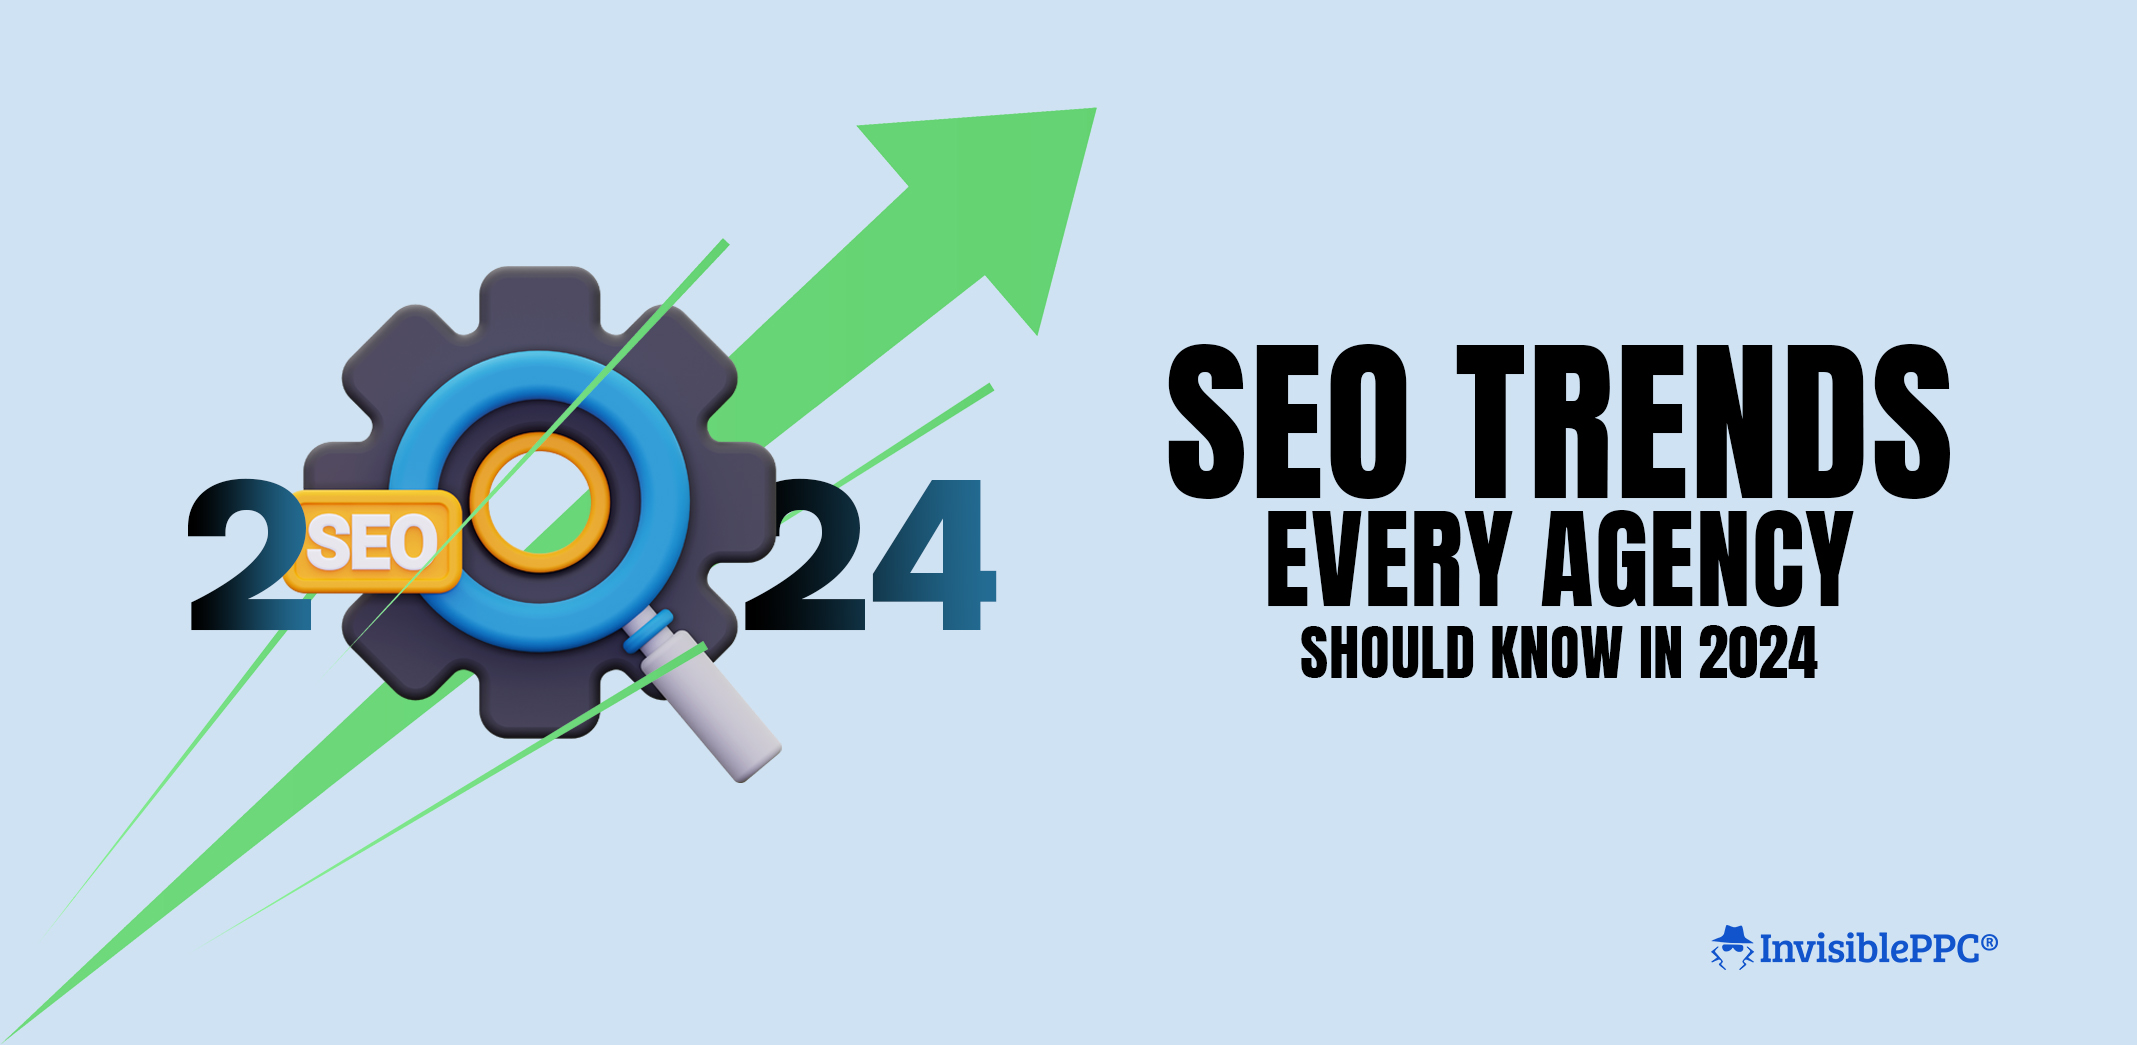 SEO Trends Every Agency Should Know in 2024